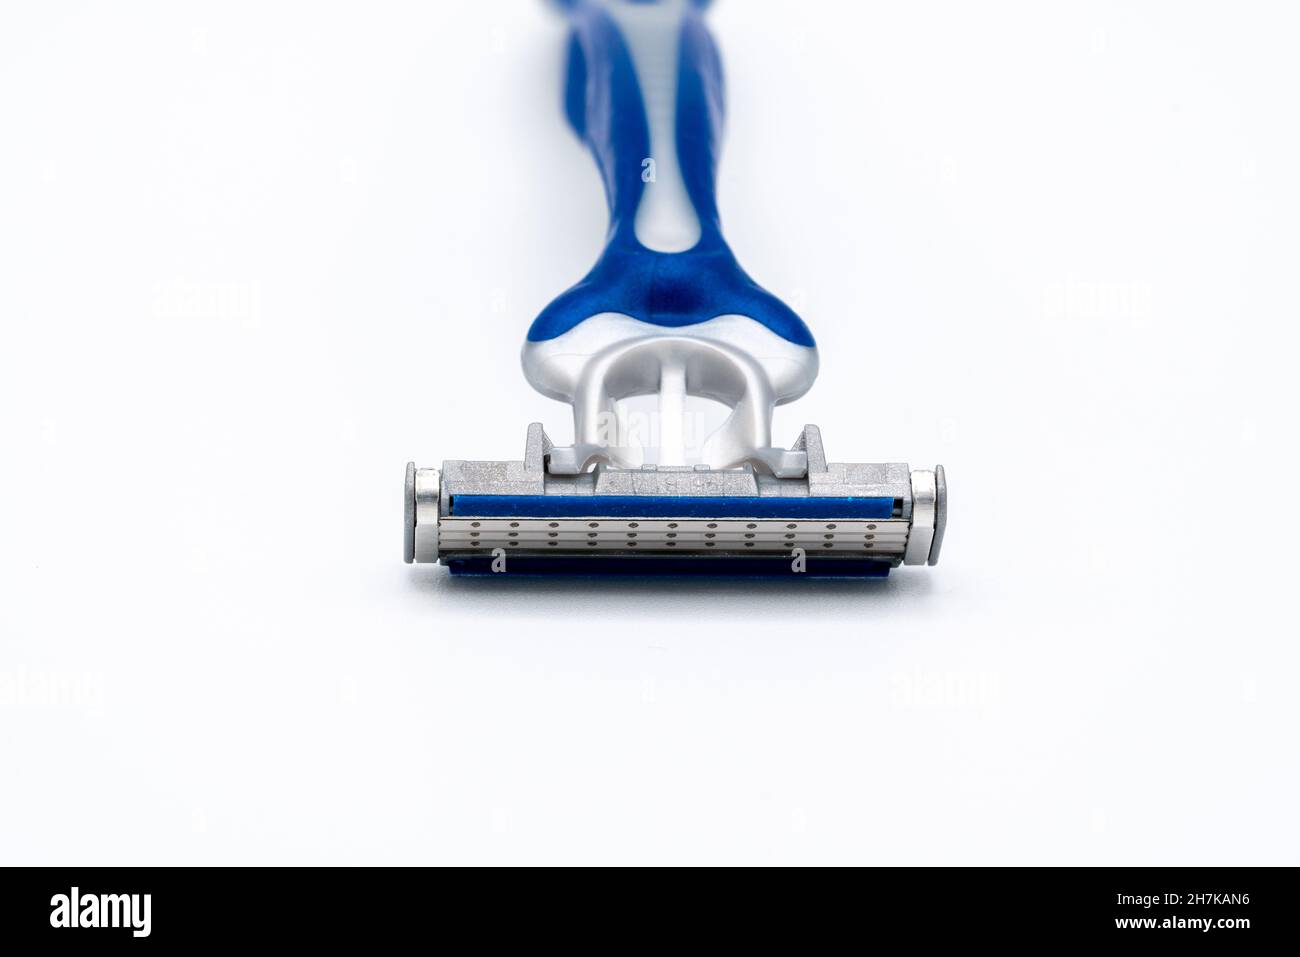 triple blade razor head in blue and gray colors on light background Stock Photo